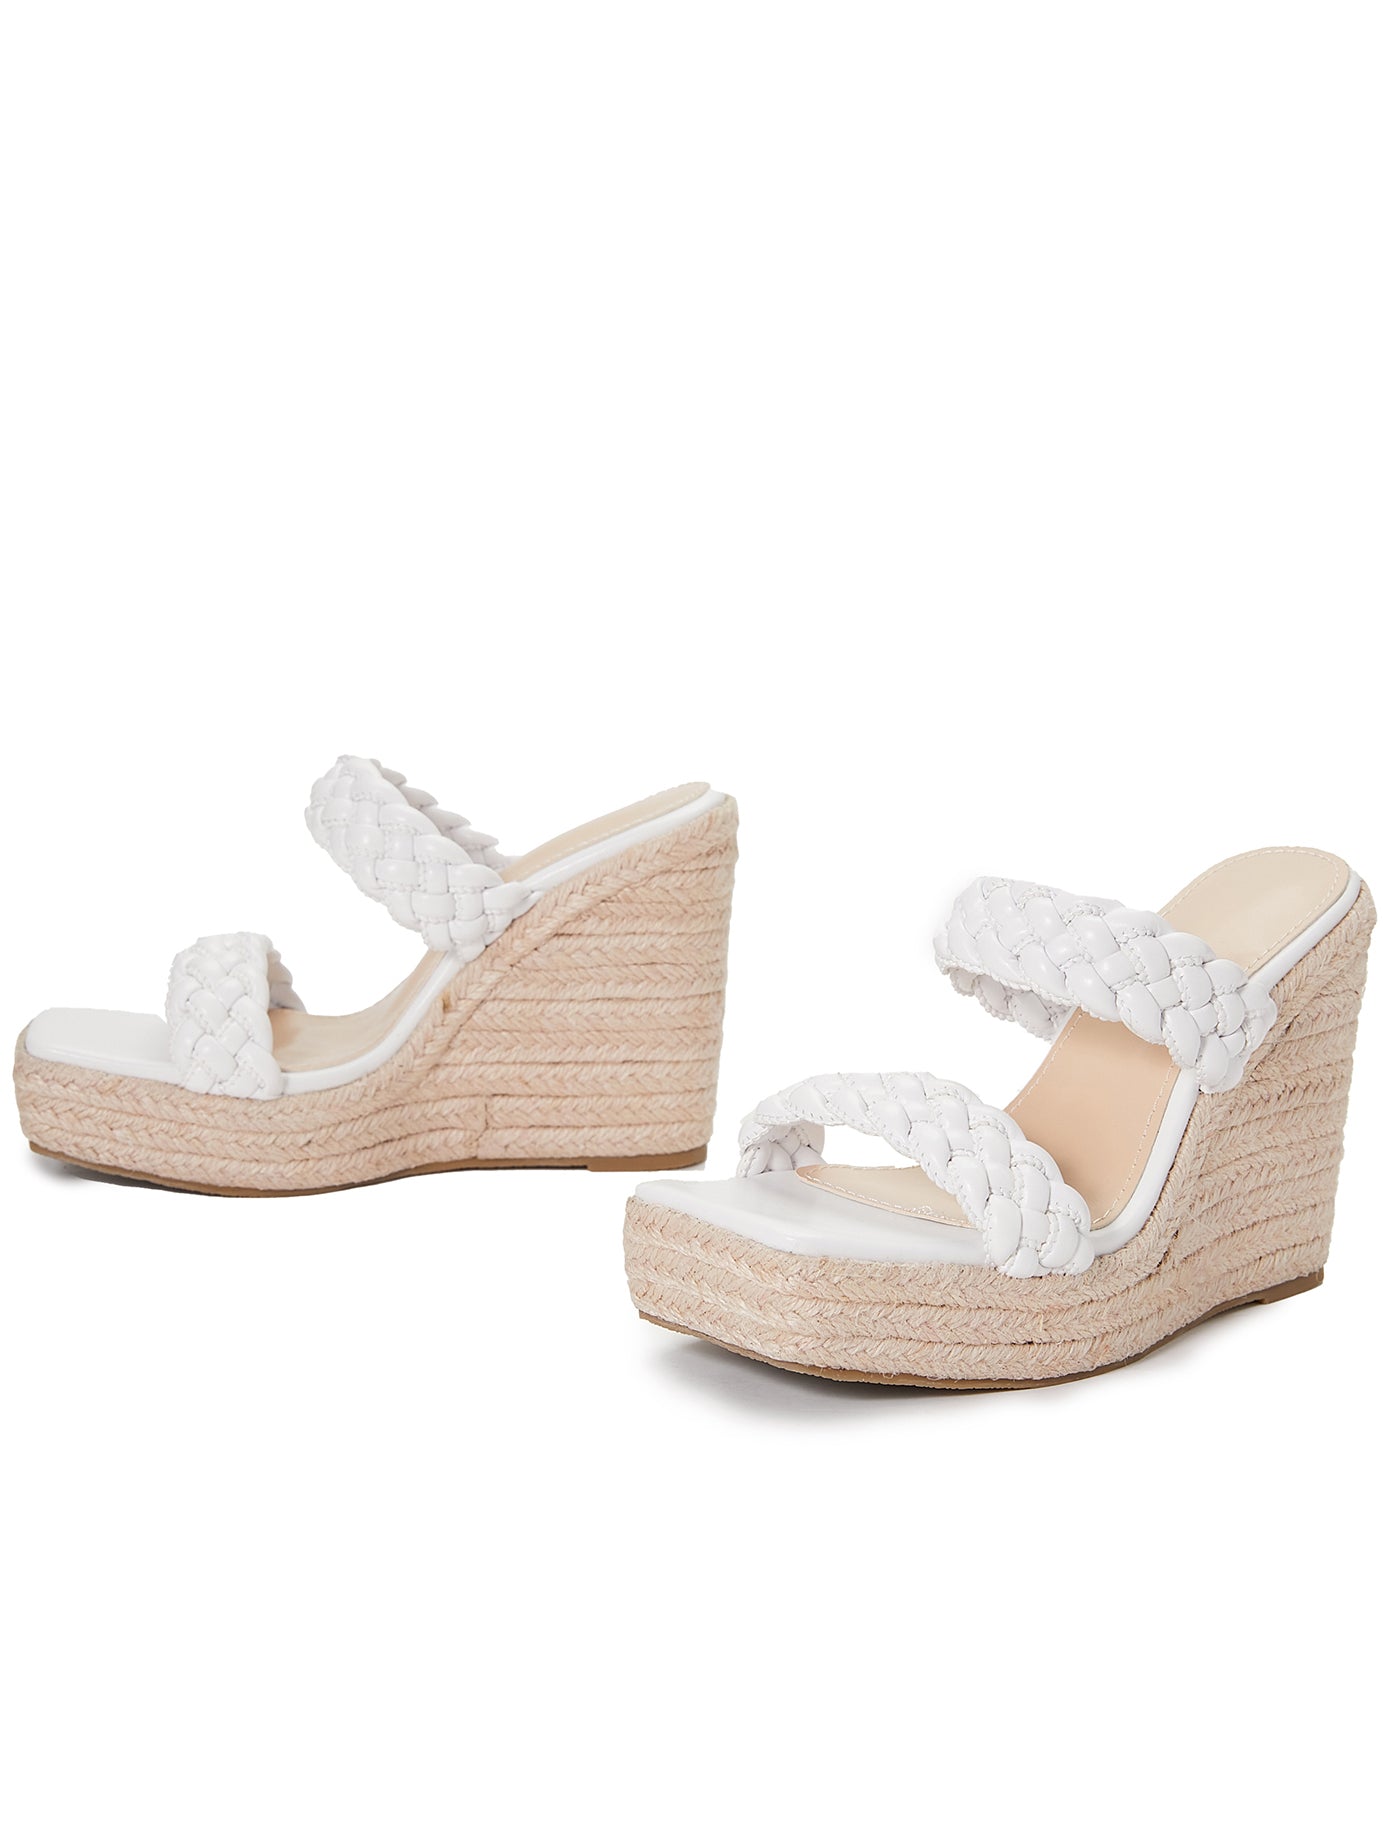 Braided Square Toe Wedge Sandals